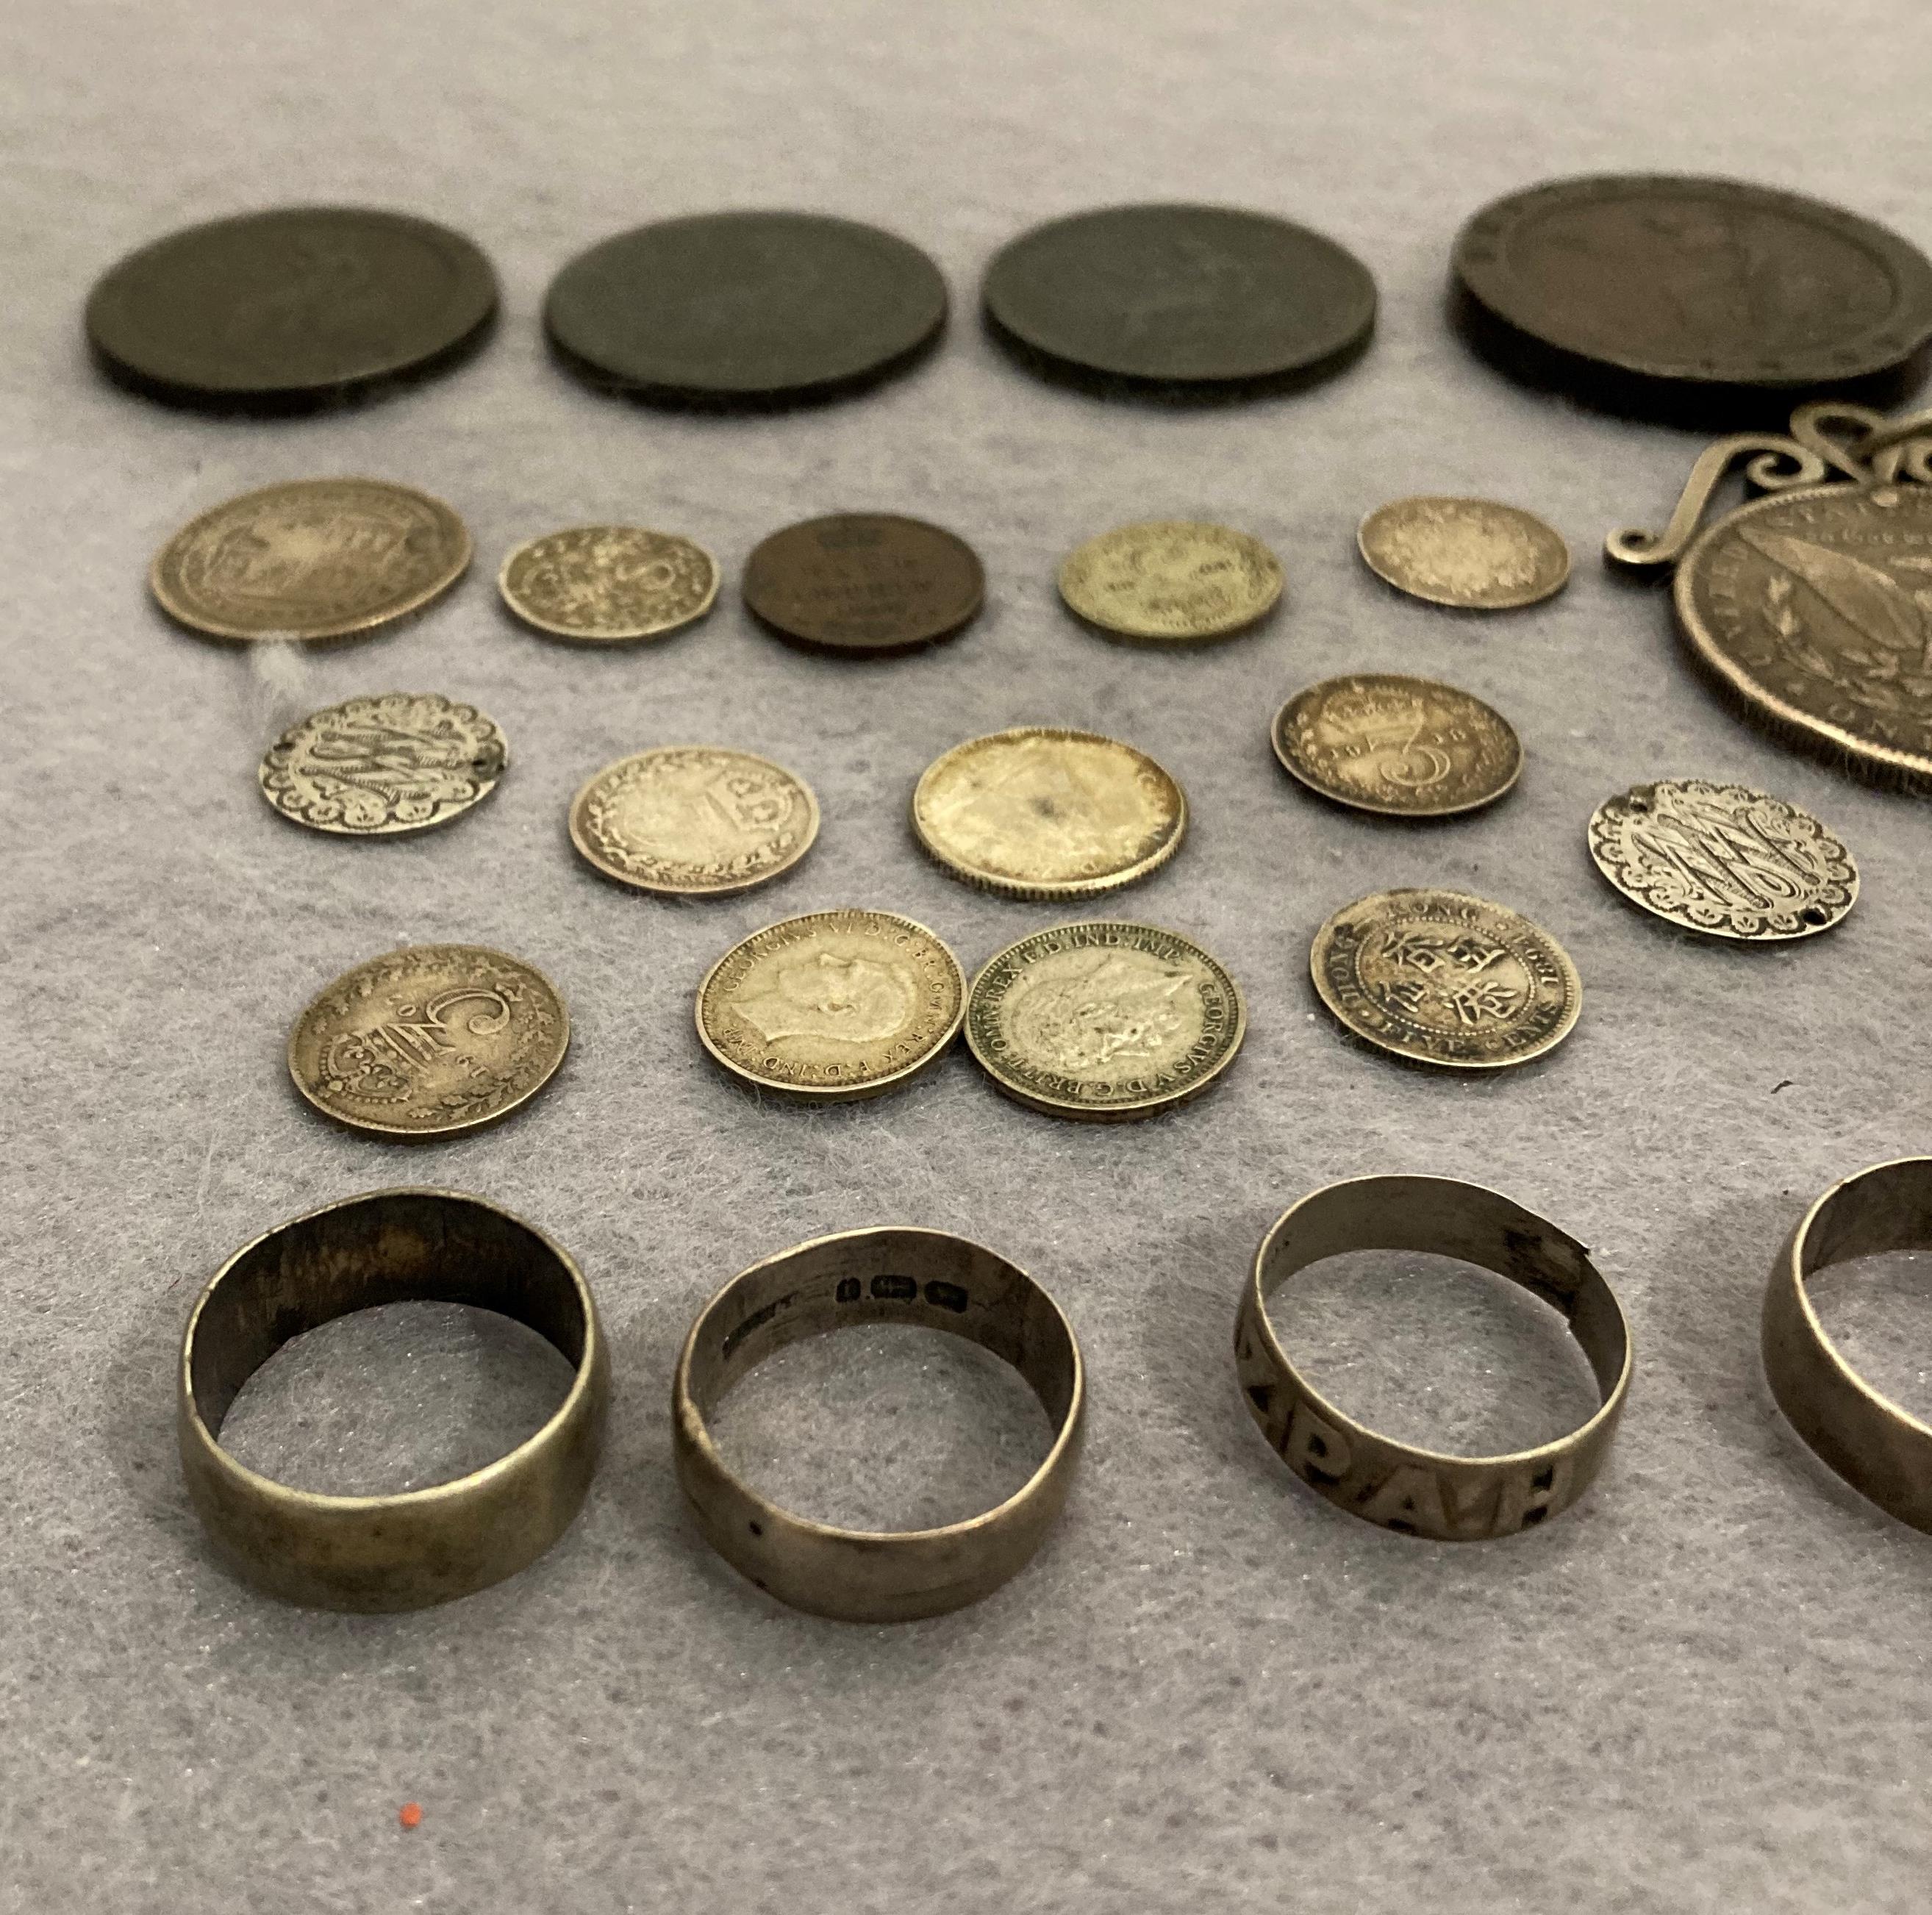 Contents to box - USA 1883 silver US dollar on chain with other silver coins, - Image 2 of 4